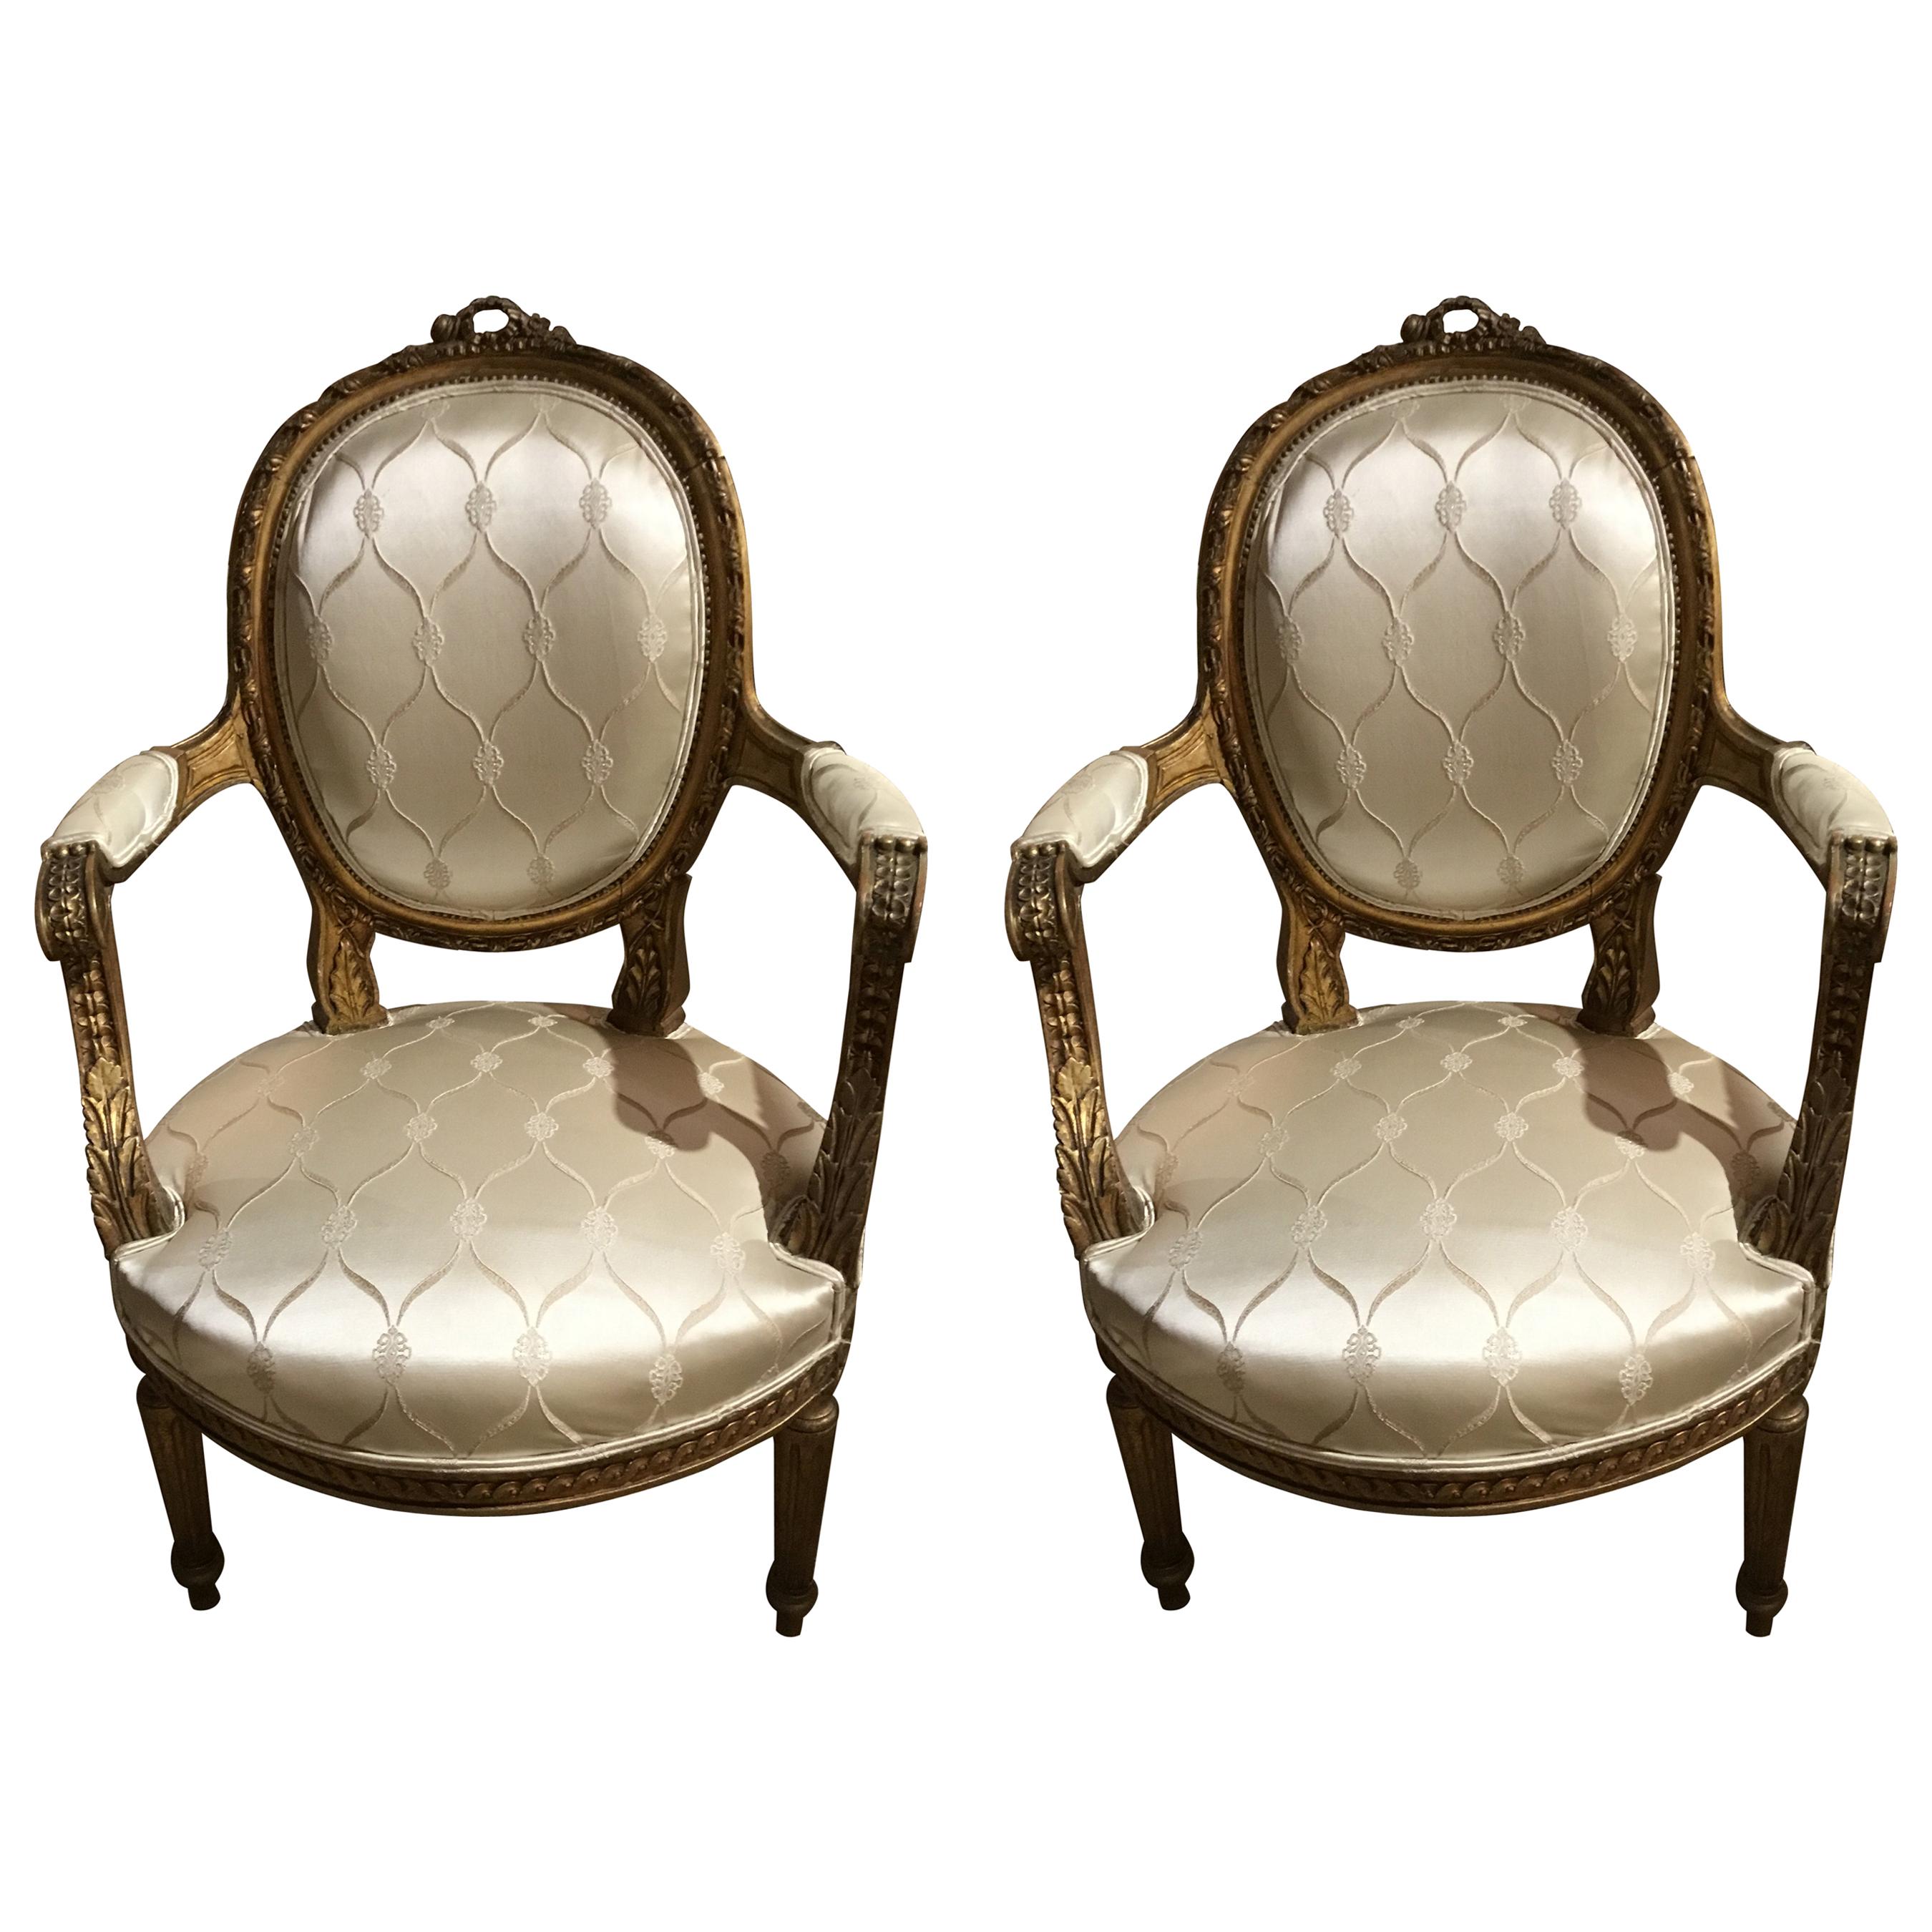 Pair of 19th Century Louis XVI Style Giltwood Chairs with New Upholstery